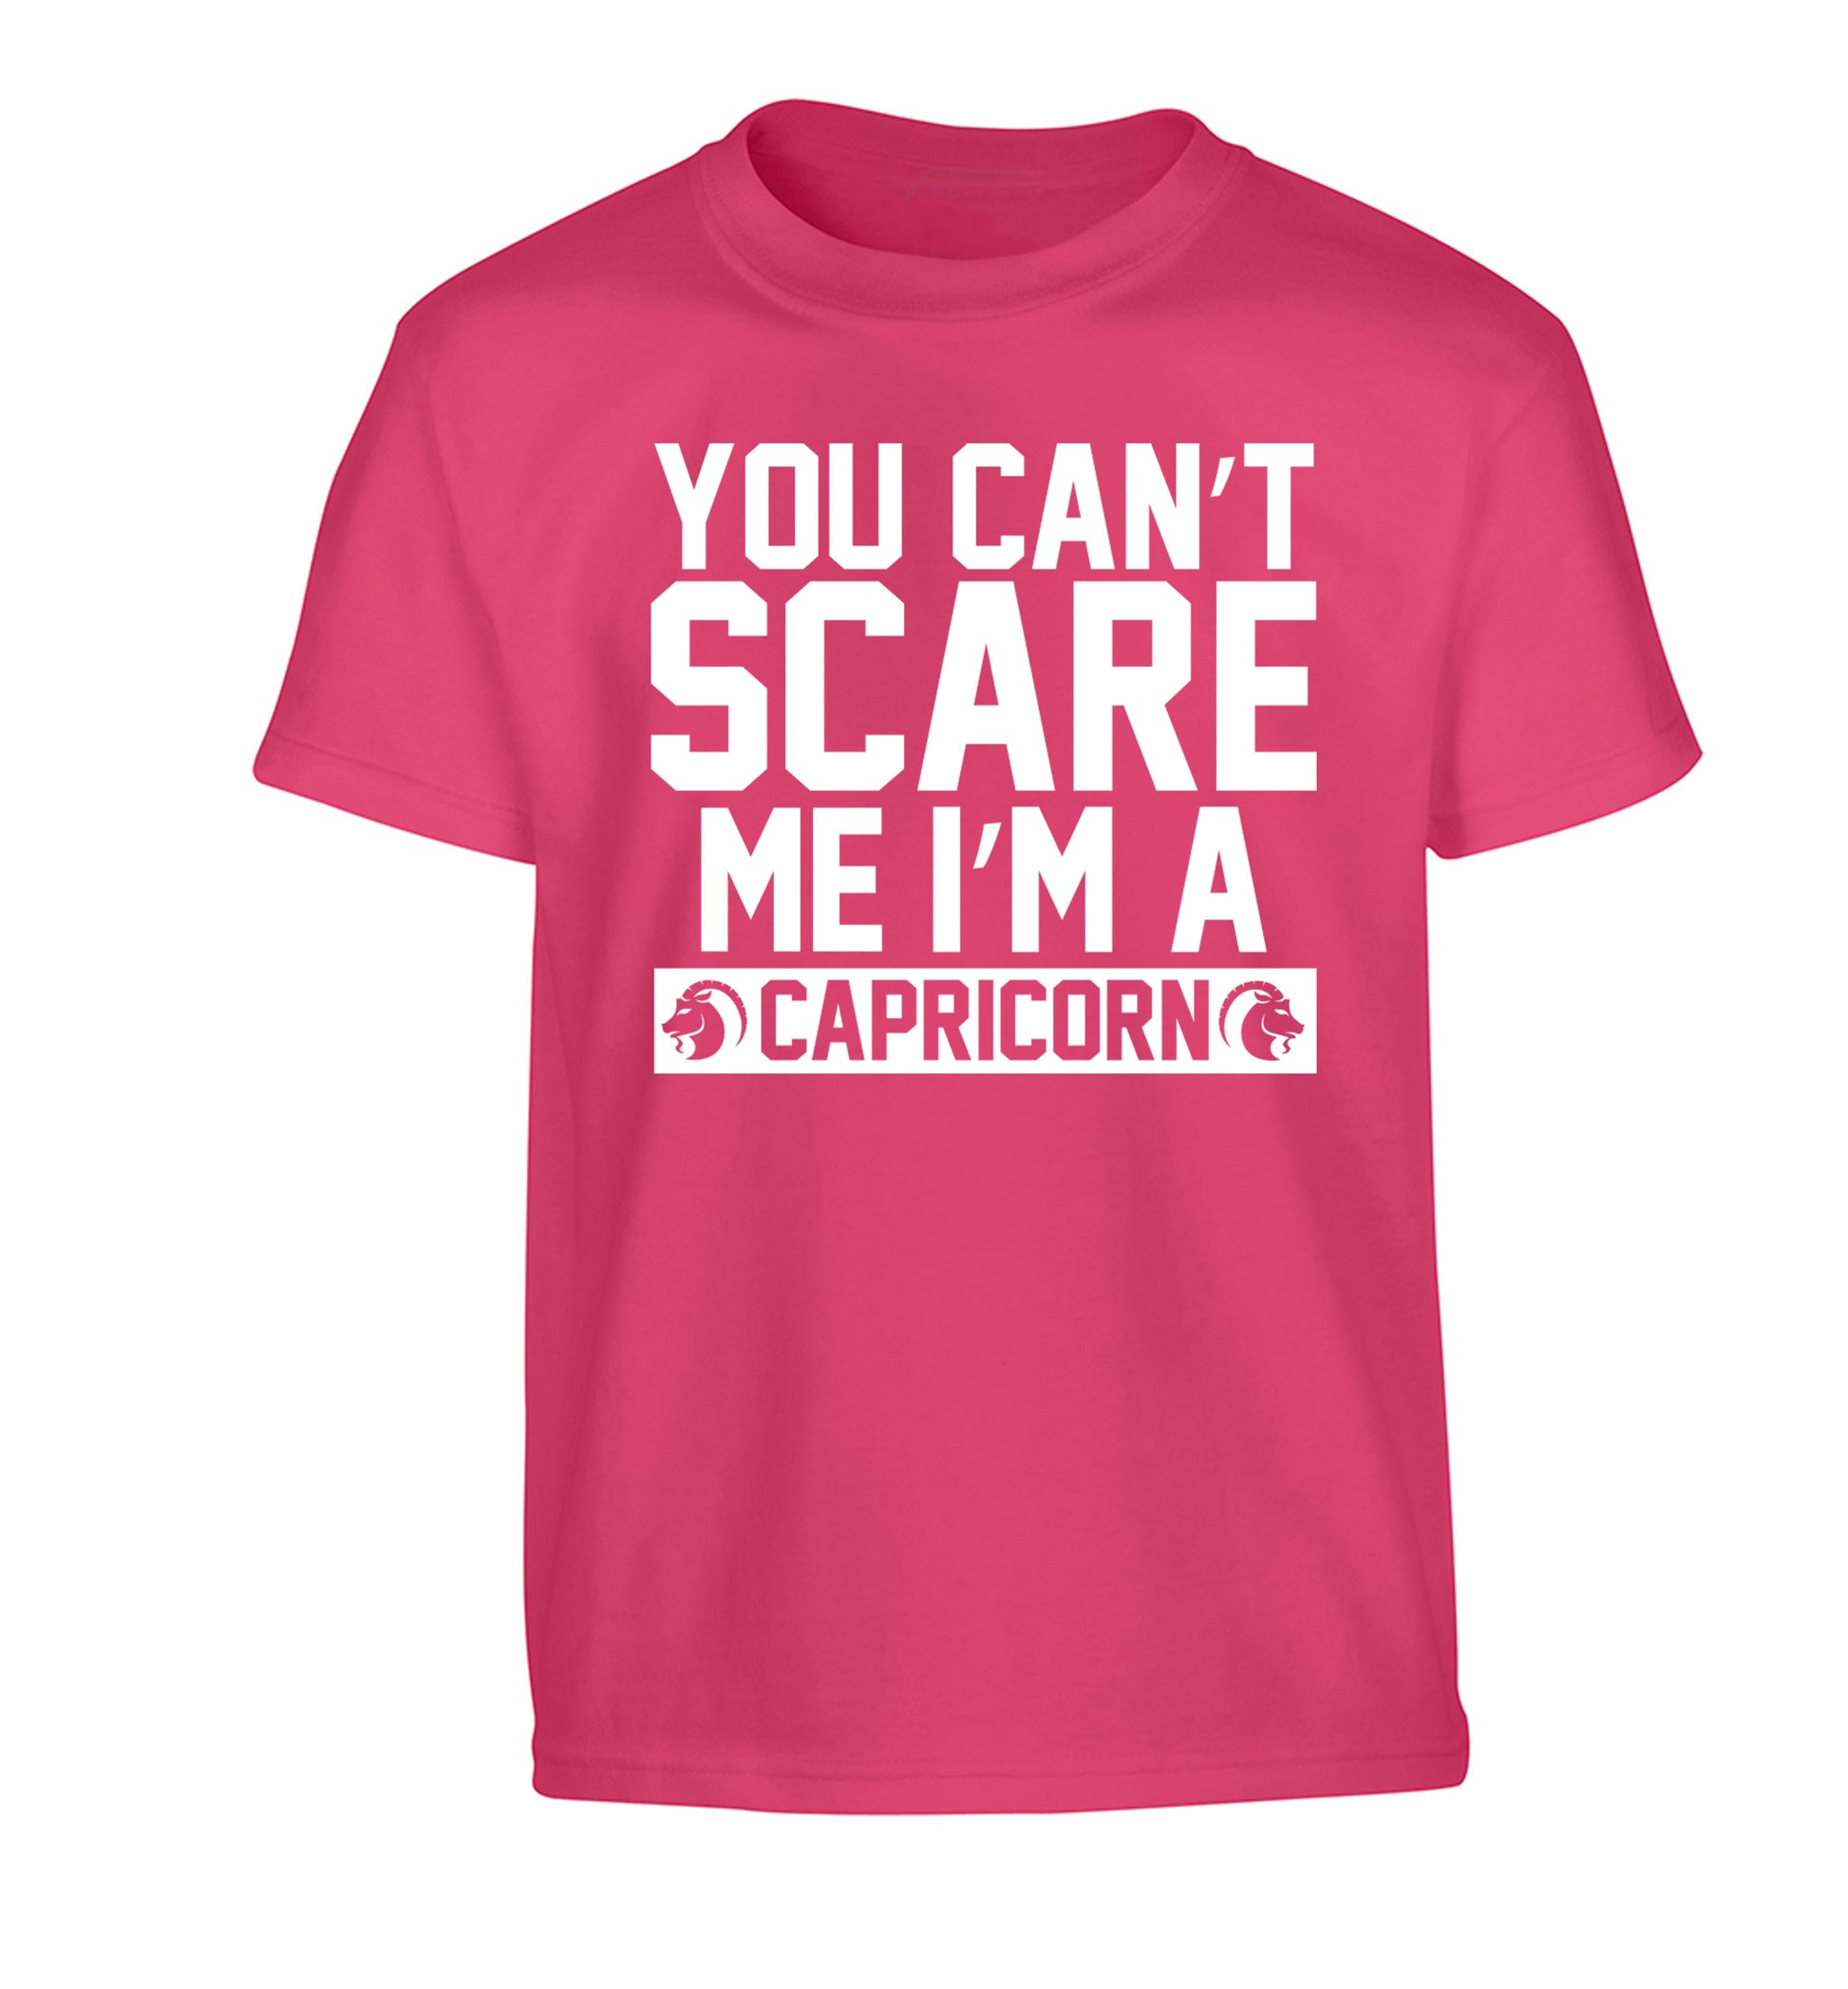 You can't scare me I'm a capricorn Children's pink Tshirt 12-13 Years